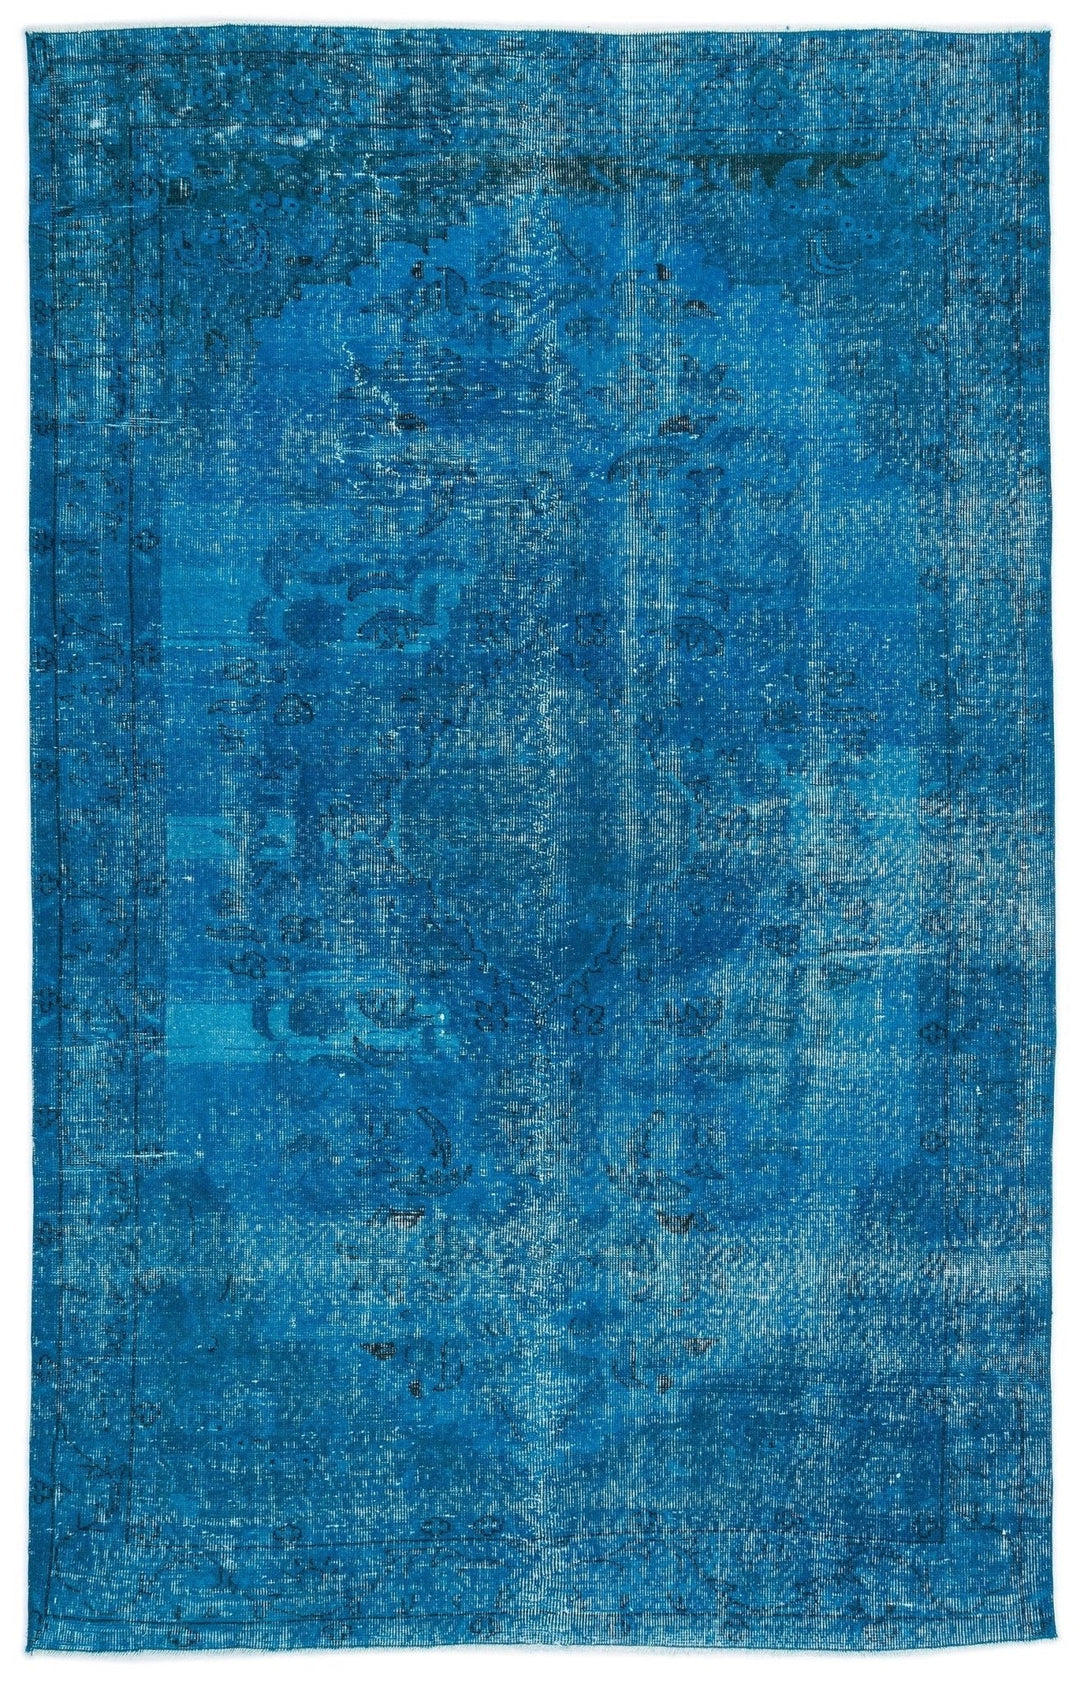 Athens 15558 Blue Tumbled Wool Hand Woven Carpet 168 x 265